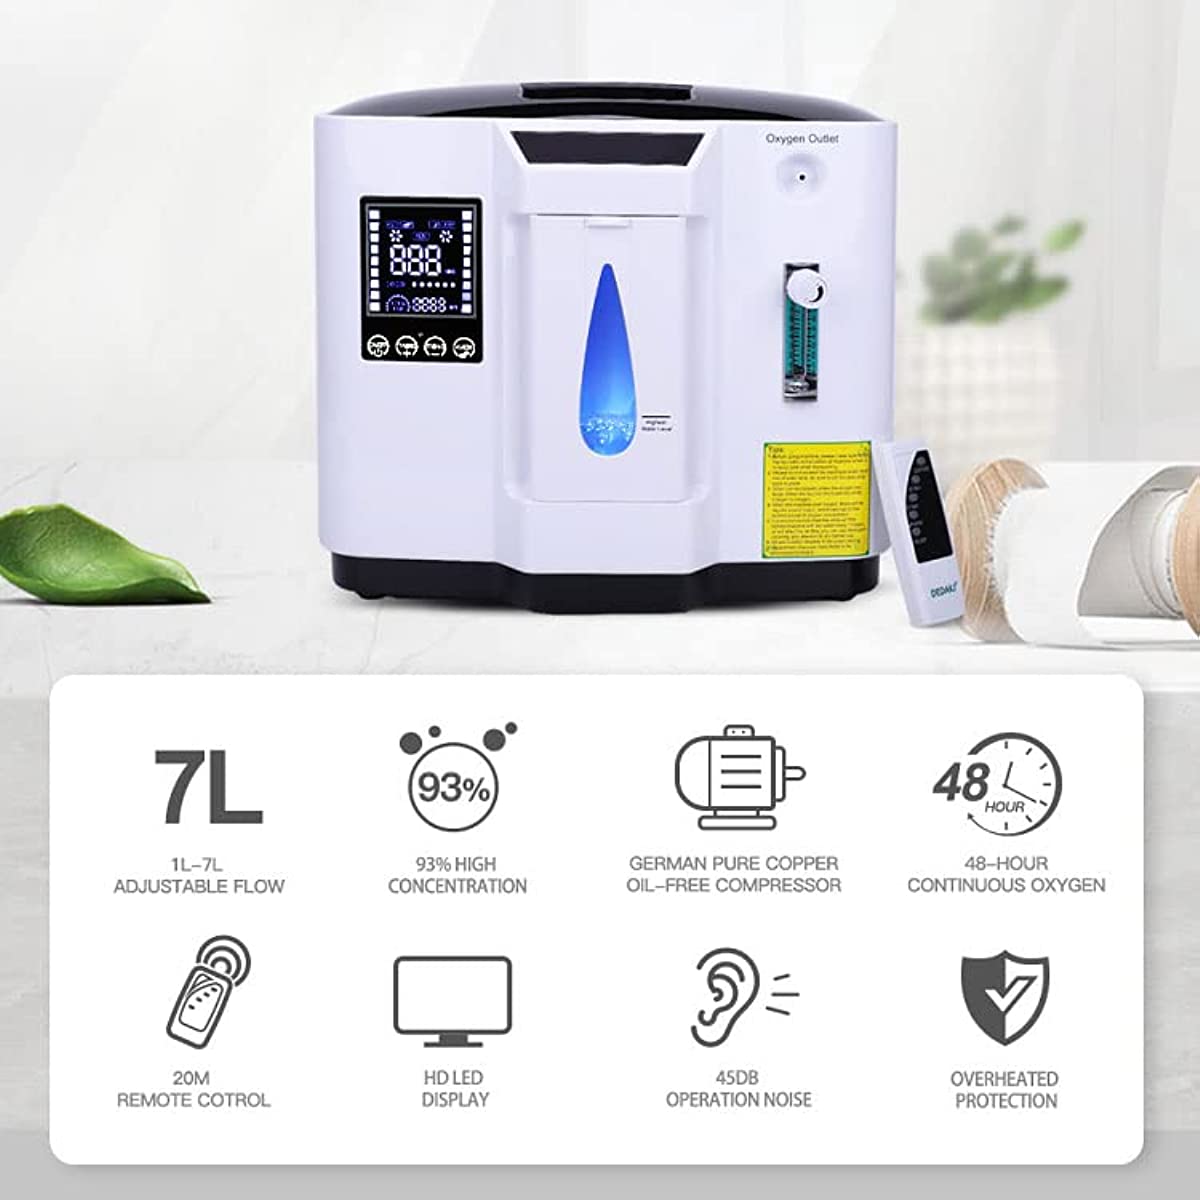 Oxygen Concentrator - Portable Oxygen Concentrator for Travel & Home Use for Breathing, Stable Oxygen Boost，Breathe Help, Can Remote Control, Help Health, 110V Household Medical Equipment